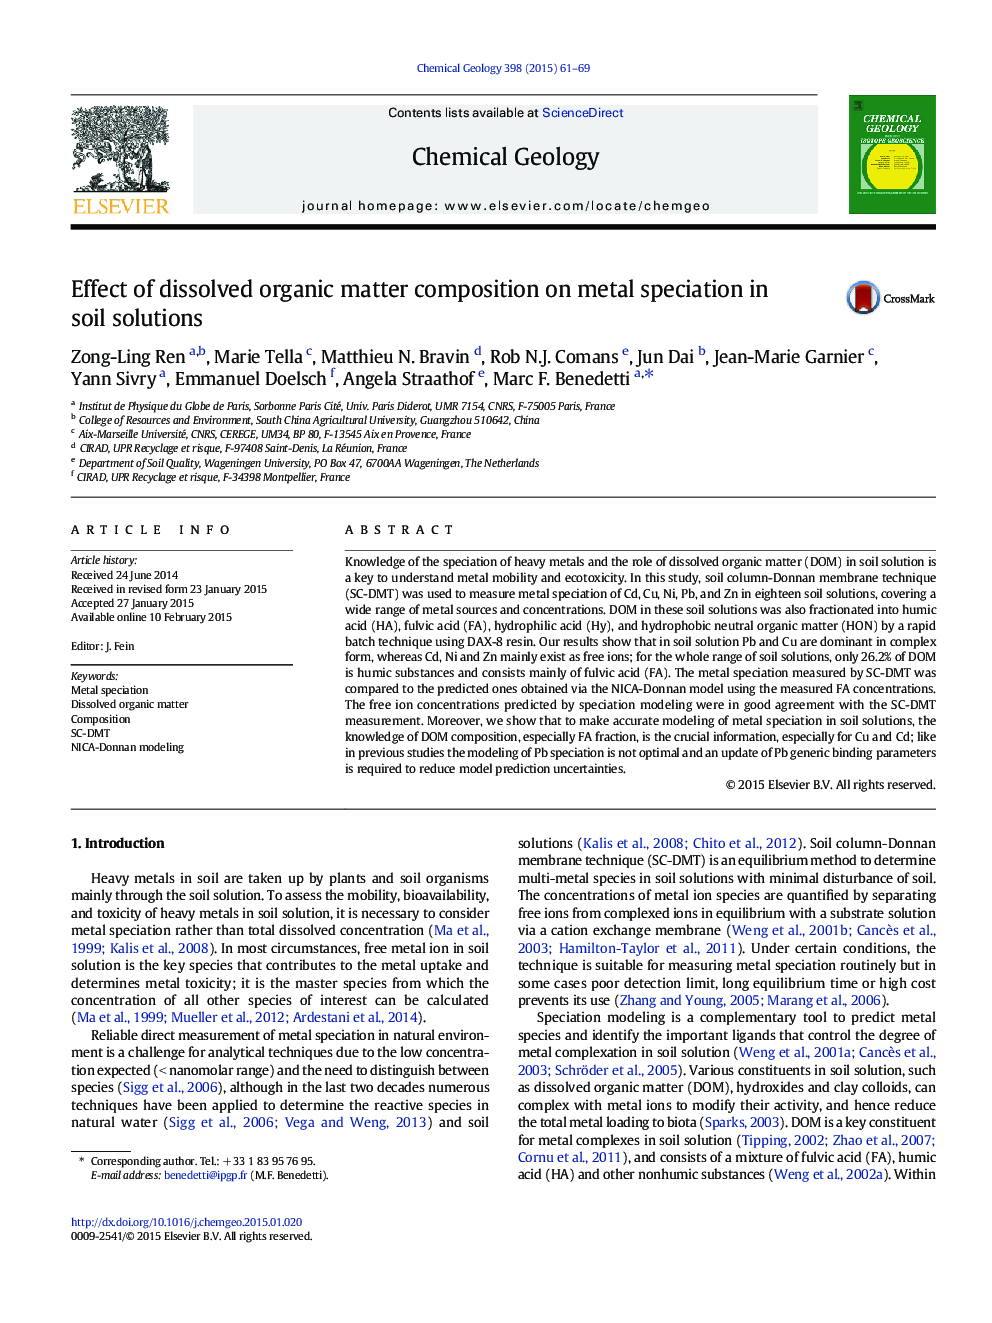 Effect of dissolved organic matter composition on metal speciation in soil solutions